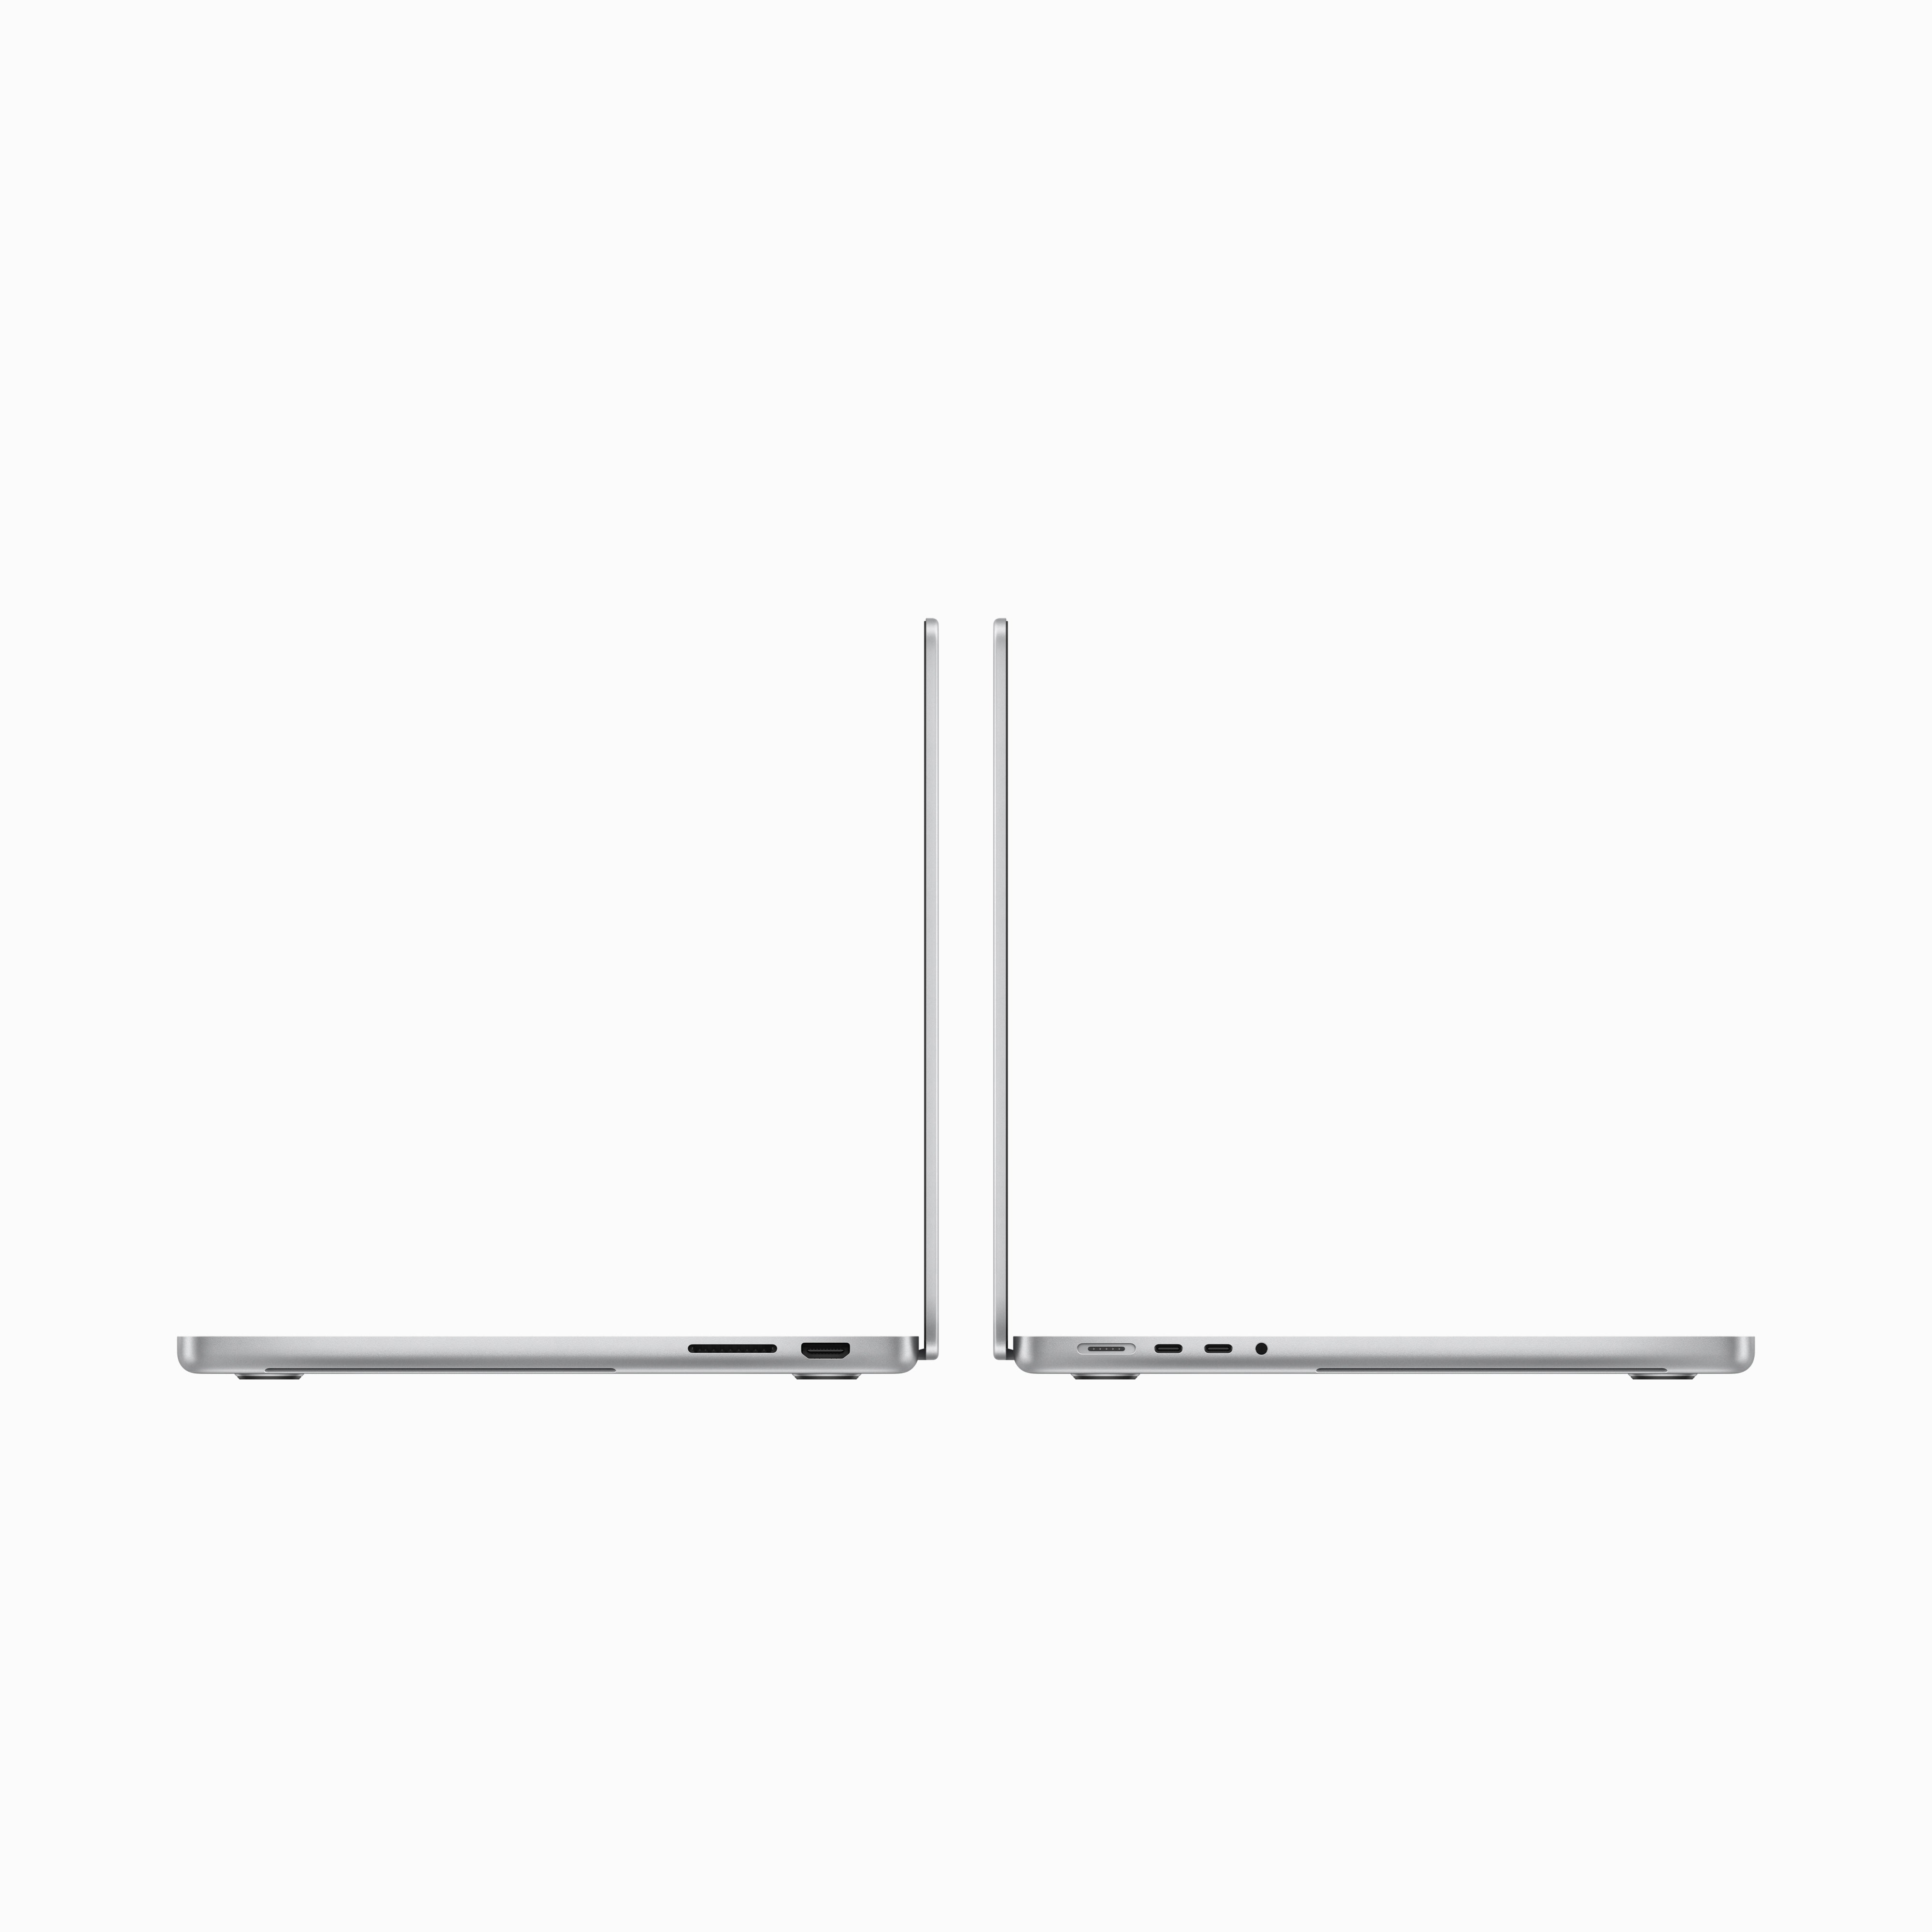 14-inch MacBook Pro: Apple M3 chip with 8C CPU and 10C GPU, 1TB SSD - Silver